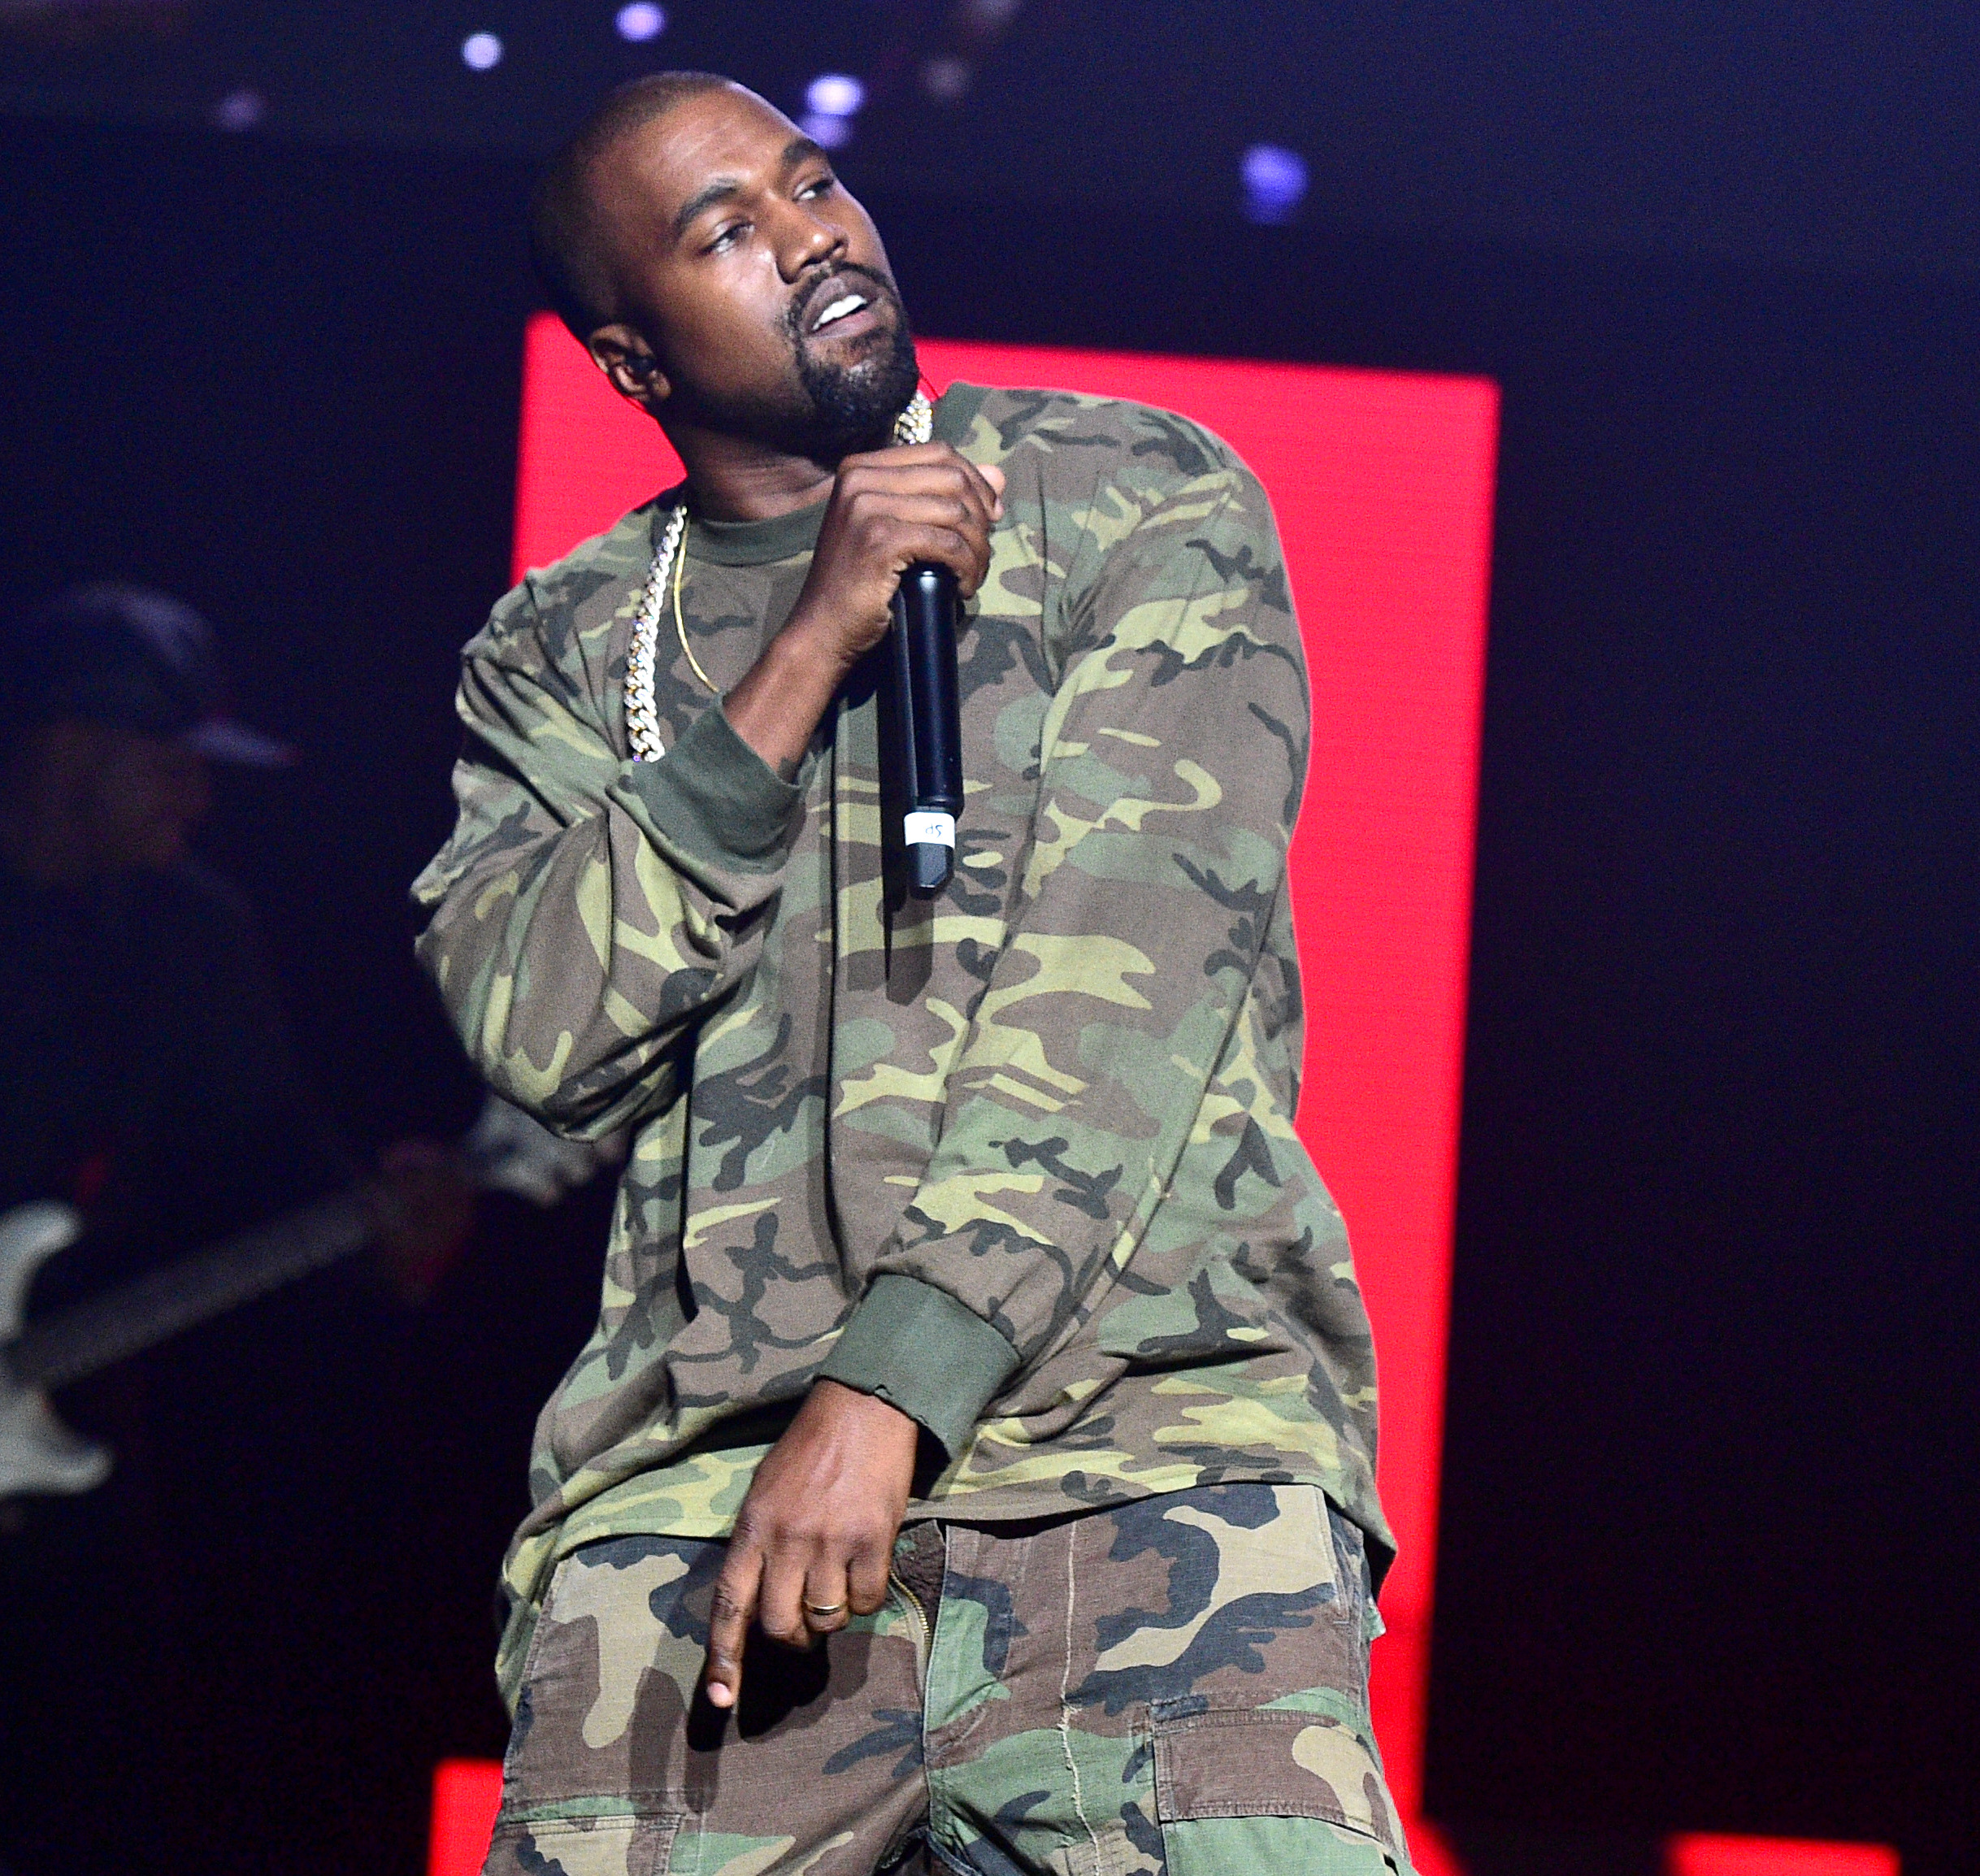 Earlier this month, Kanye went on a rant about Taylor Swift and her fans